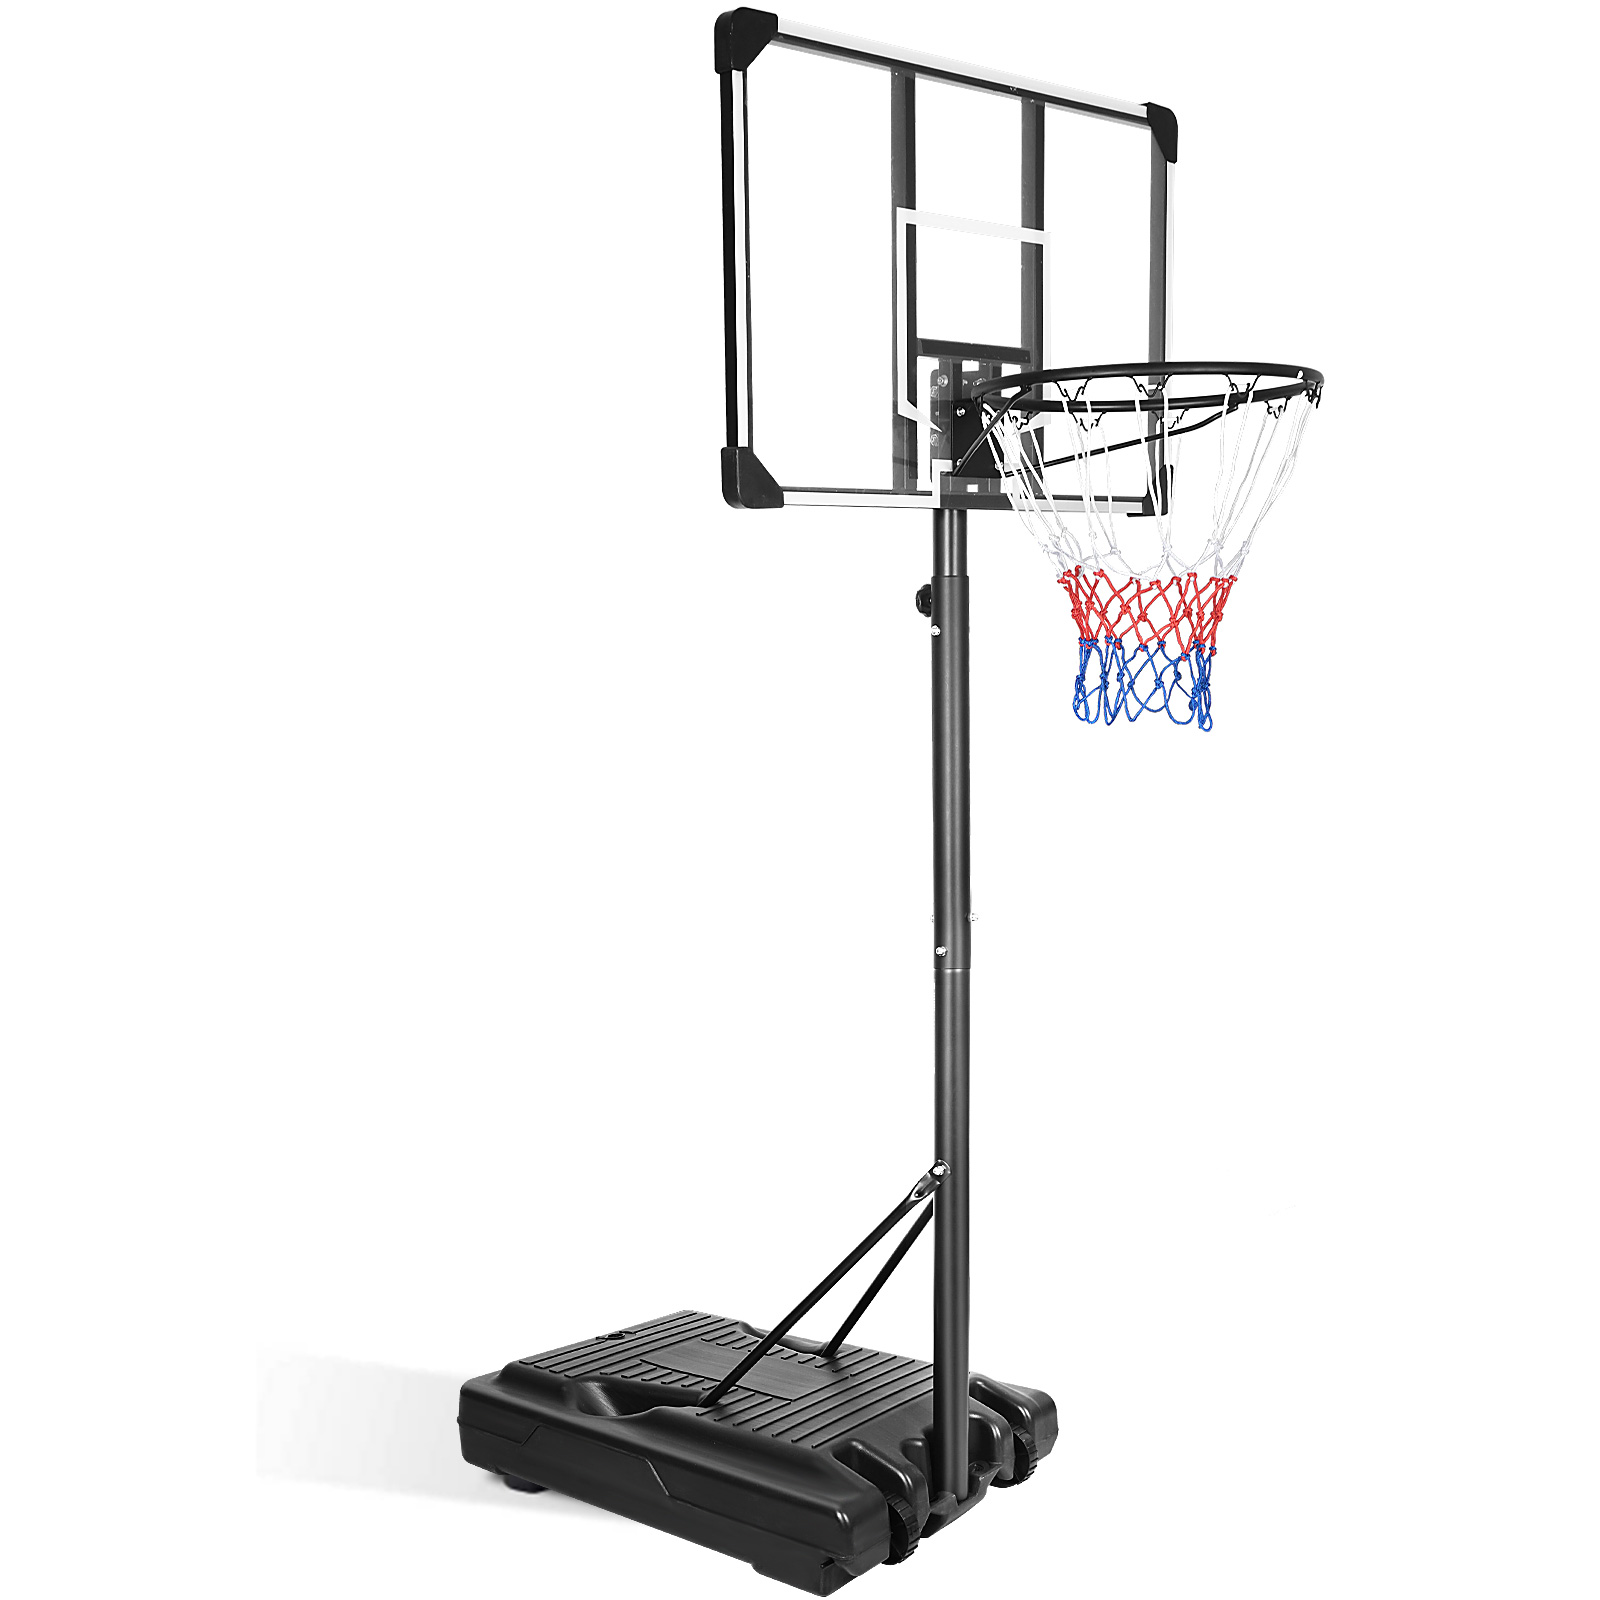 iRerts Portable Basketball Hoop for Teens Kids, Height Adjusted 6.2-8.5ft Indoor Basketball Goal System, Basketball Hoop Outdoor with Wheels and Backboard for Playground Backyard, Black - image 1 of 8